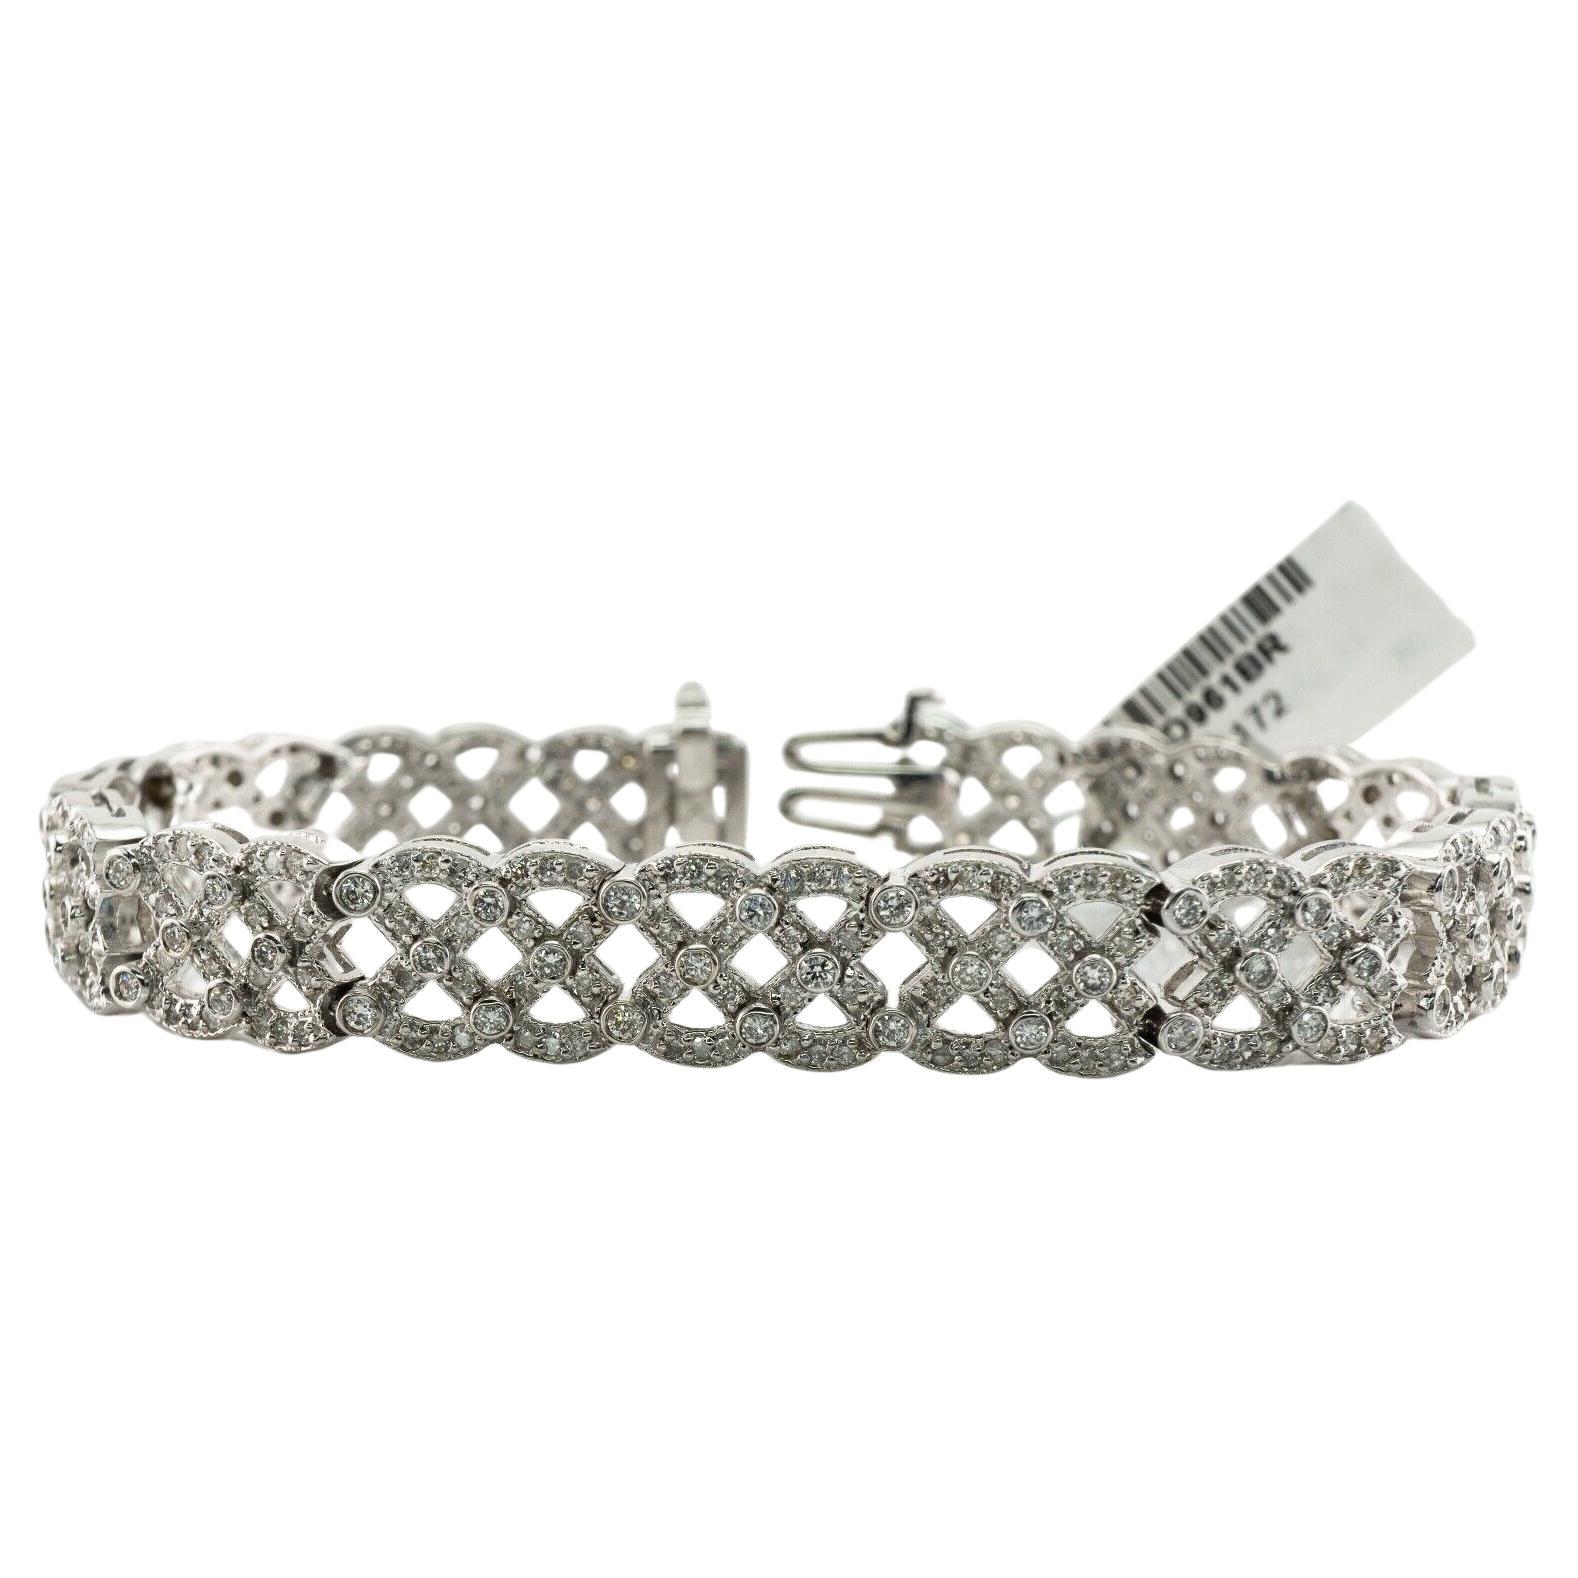 Diamond Bracelet 14K White Gold Lattice Wide 4.50 TDW

This gorgeous bracelet is finely crafted in solid 14K White Gold and set with white and fiery diamonds. The tag is attached. The bracelet is studded with 390 natural diamonds. These gems are SI2